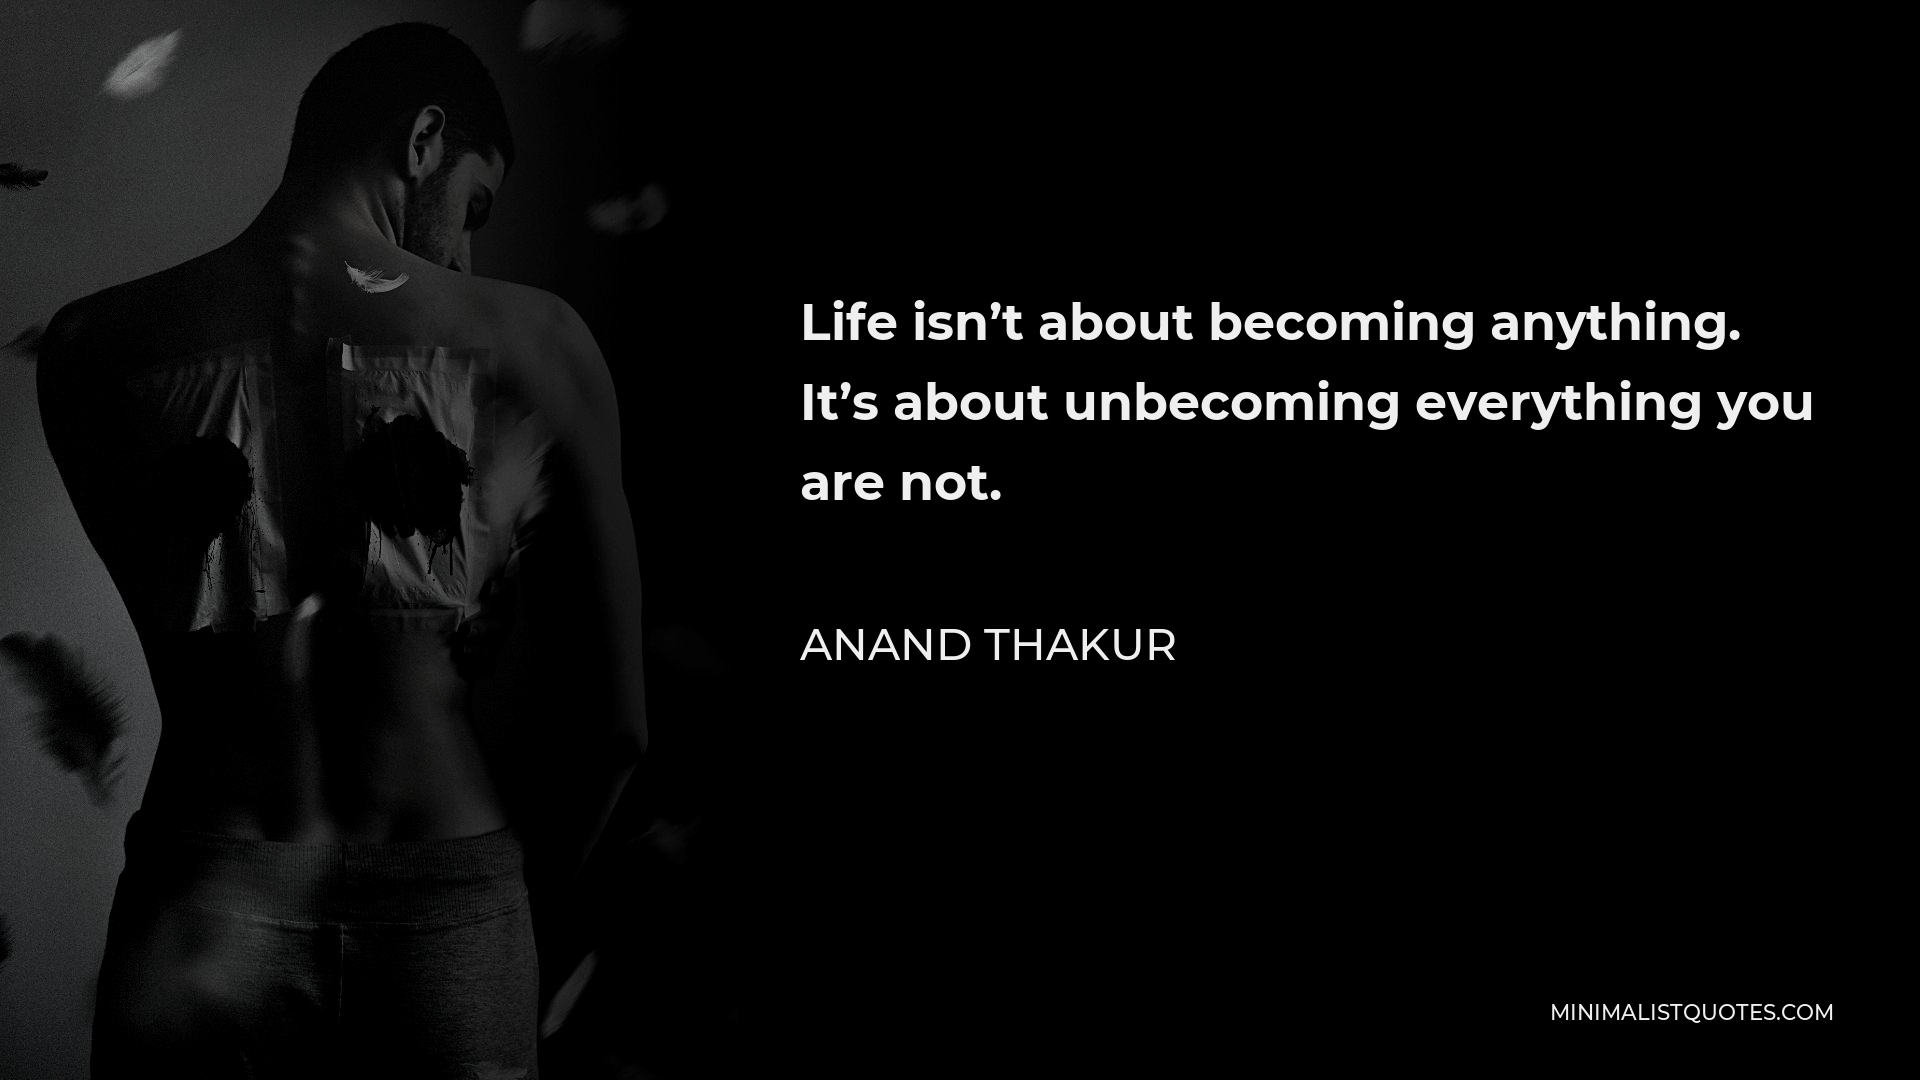 Anand Thakur Quote - Life isn’t about becoming anything. It’s about unbecoming everything you are not.